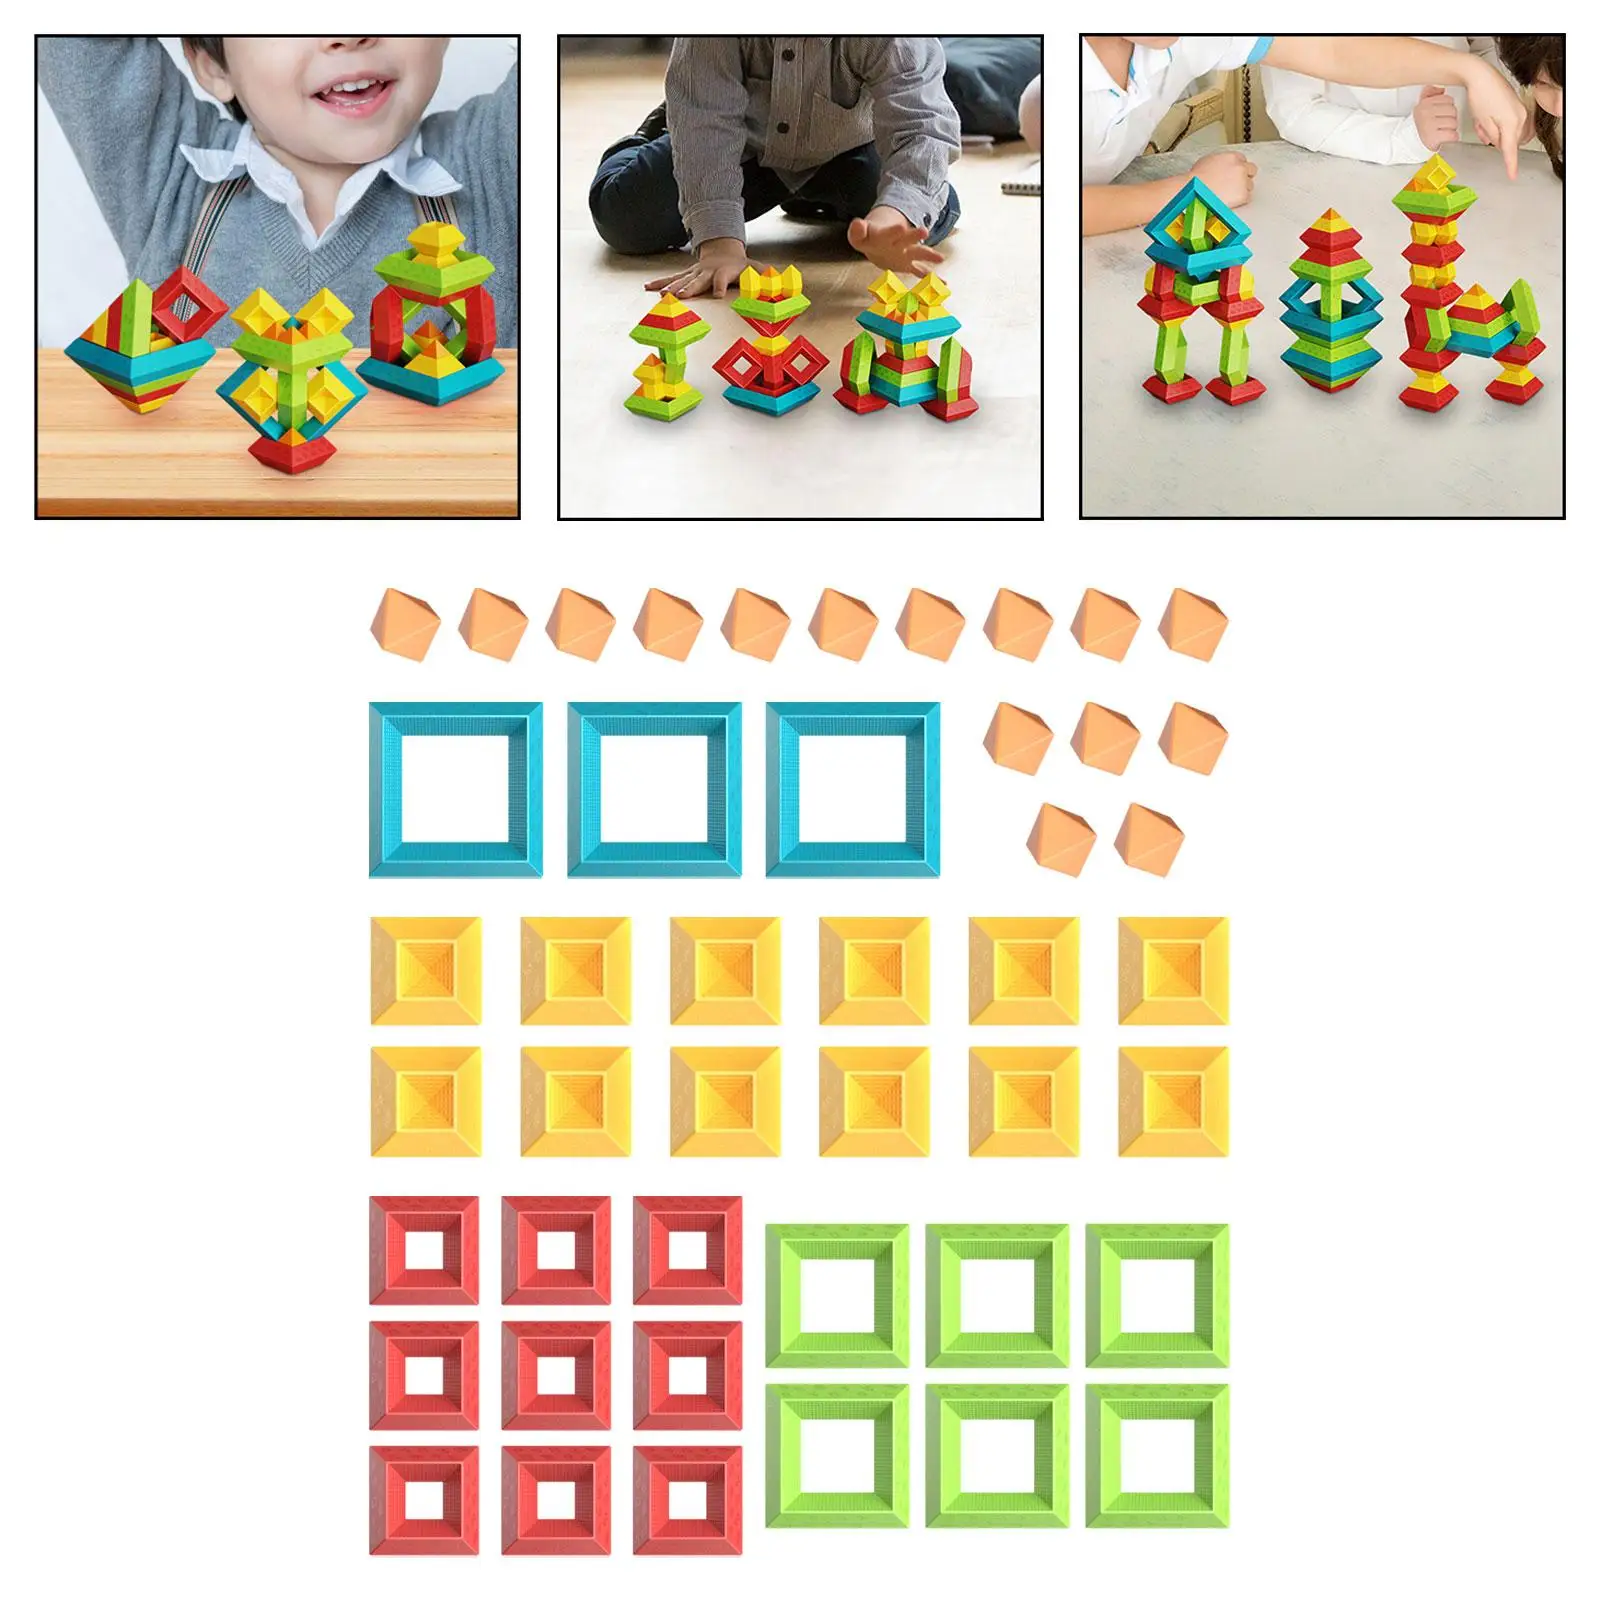 Stacking Blocks Learning Activities Stocking Stuffers Sensory Baby Stacking Toys for Boy Girls Children Toddlers Kids